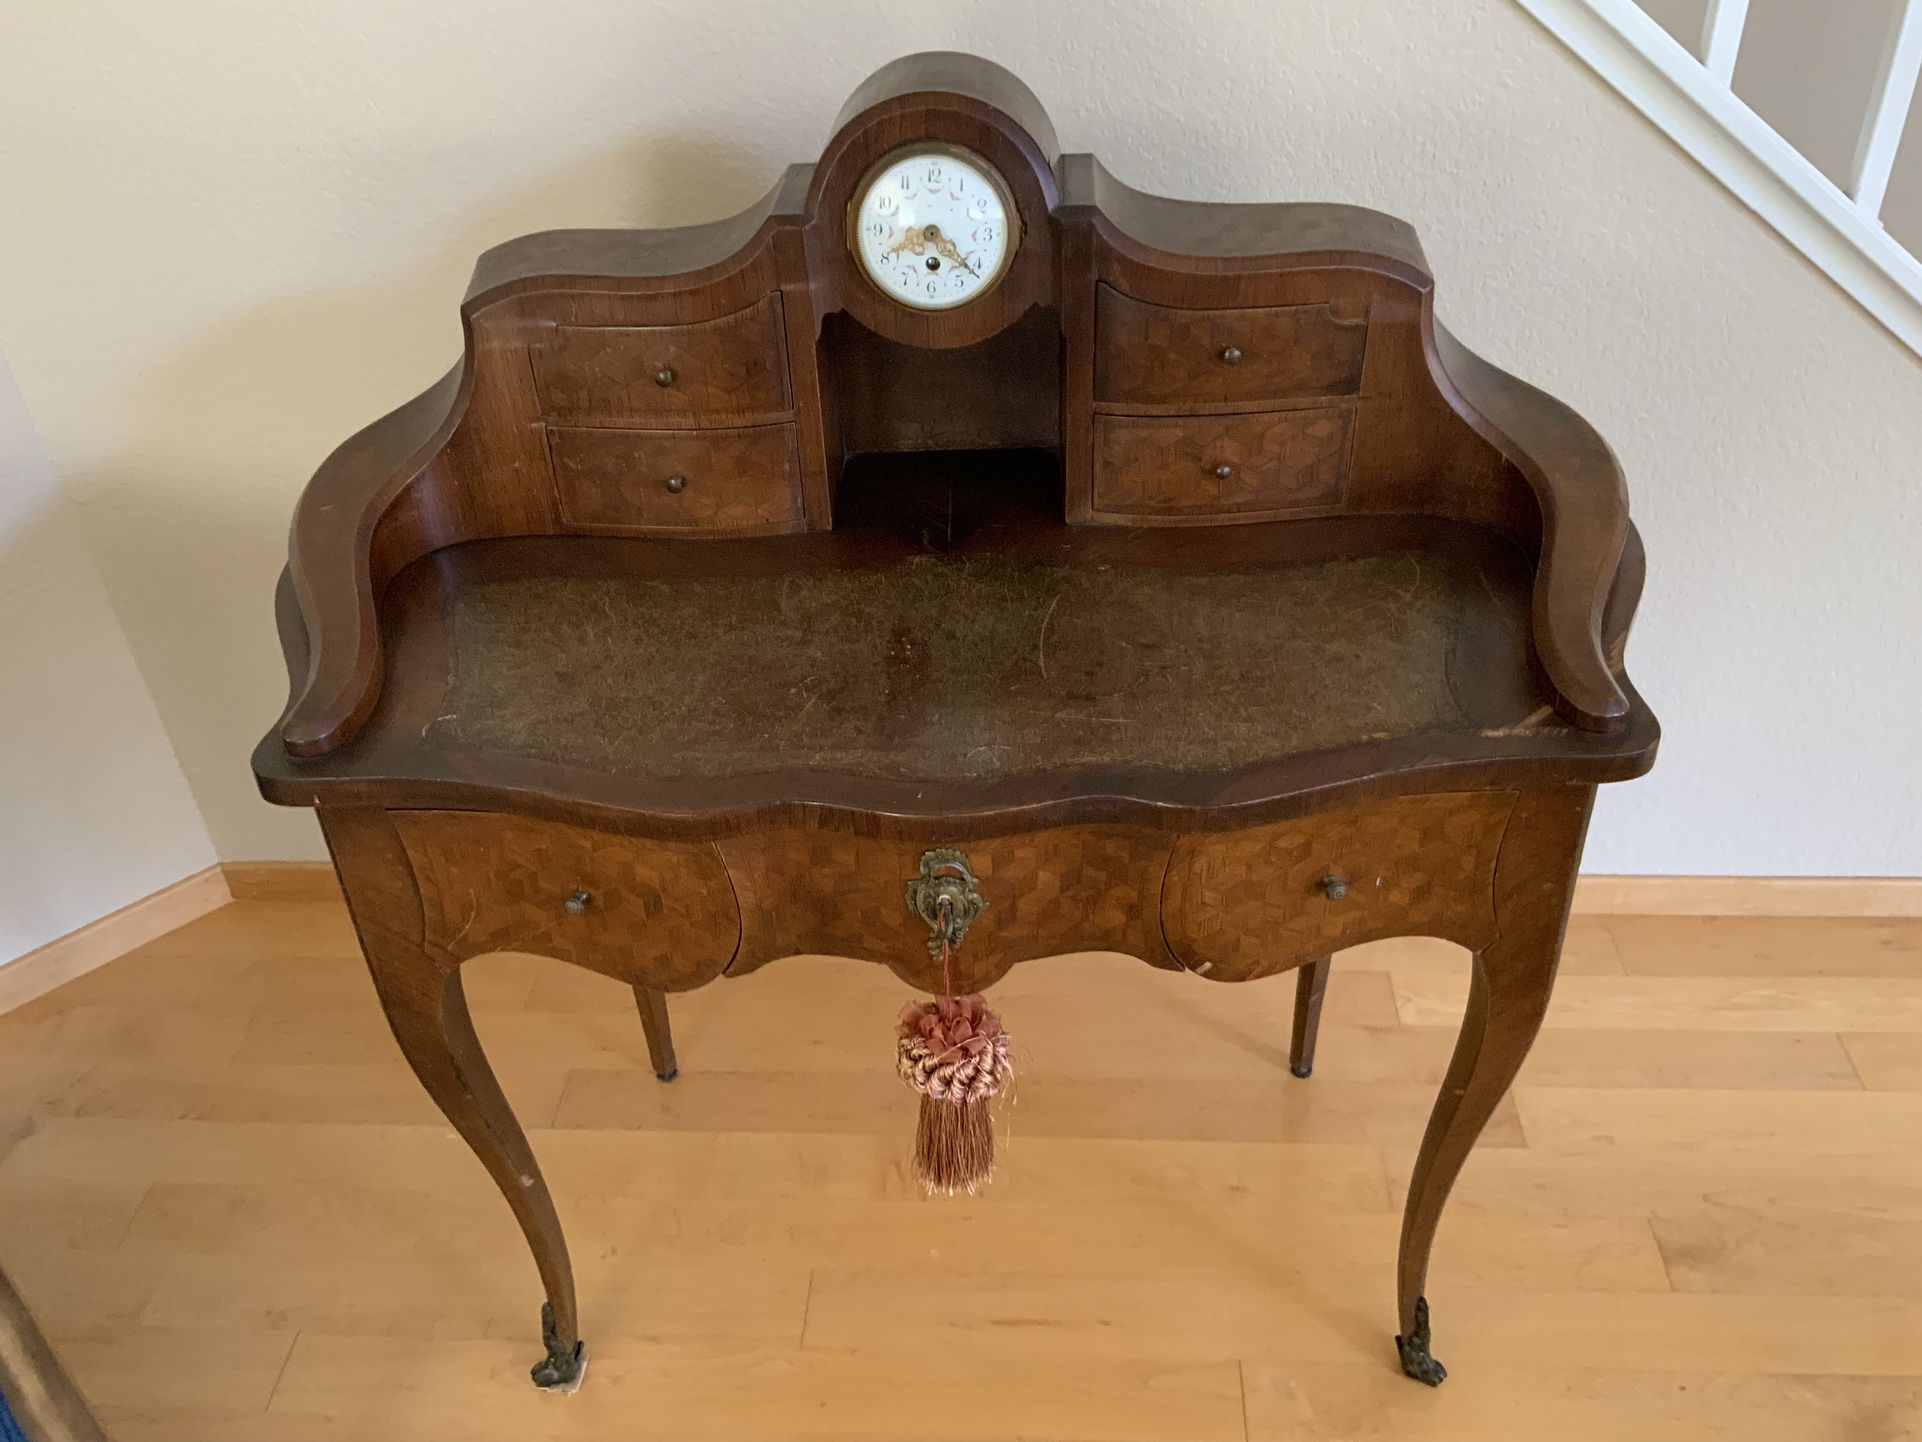 Antique Belle Epoque French Desk With Porcelain Clock (late 1800’s)